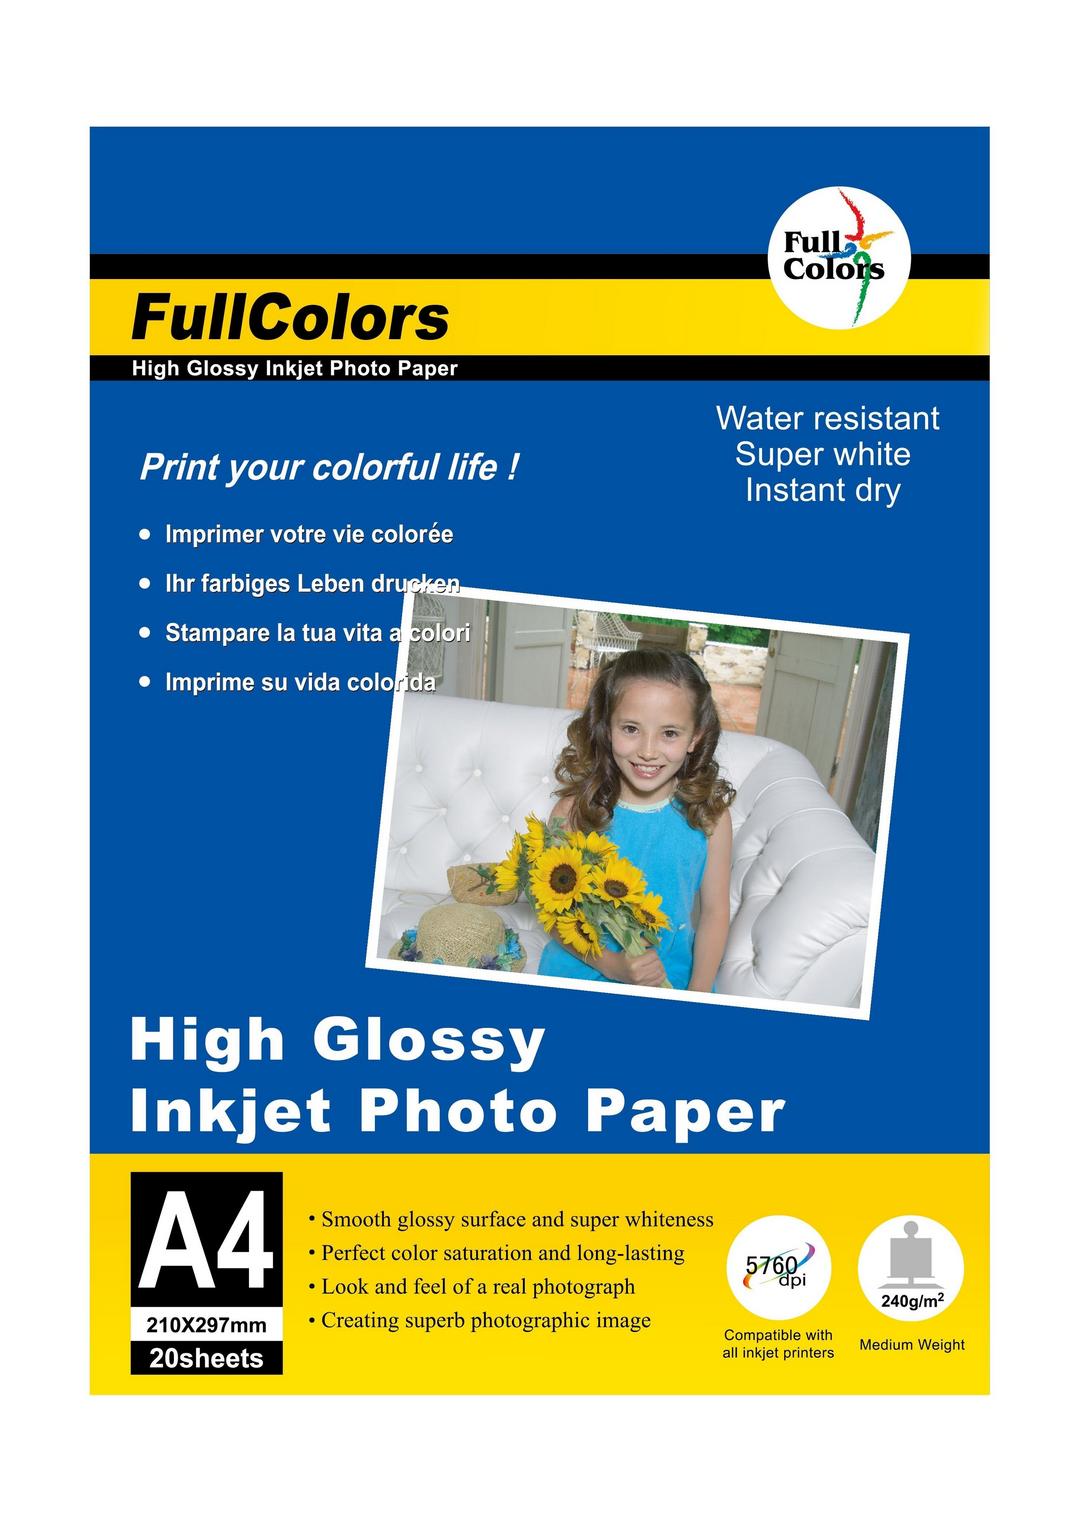 Fullcolors High Glossy A4 240Gsm Photo Paper - 20 Sheets